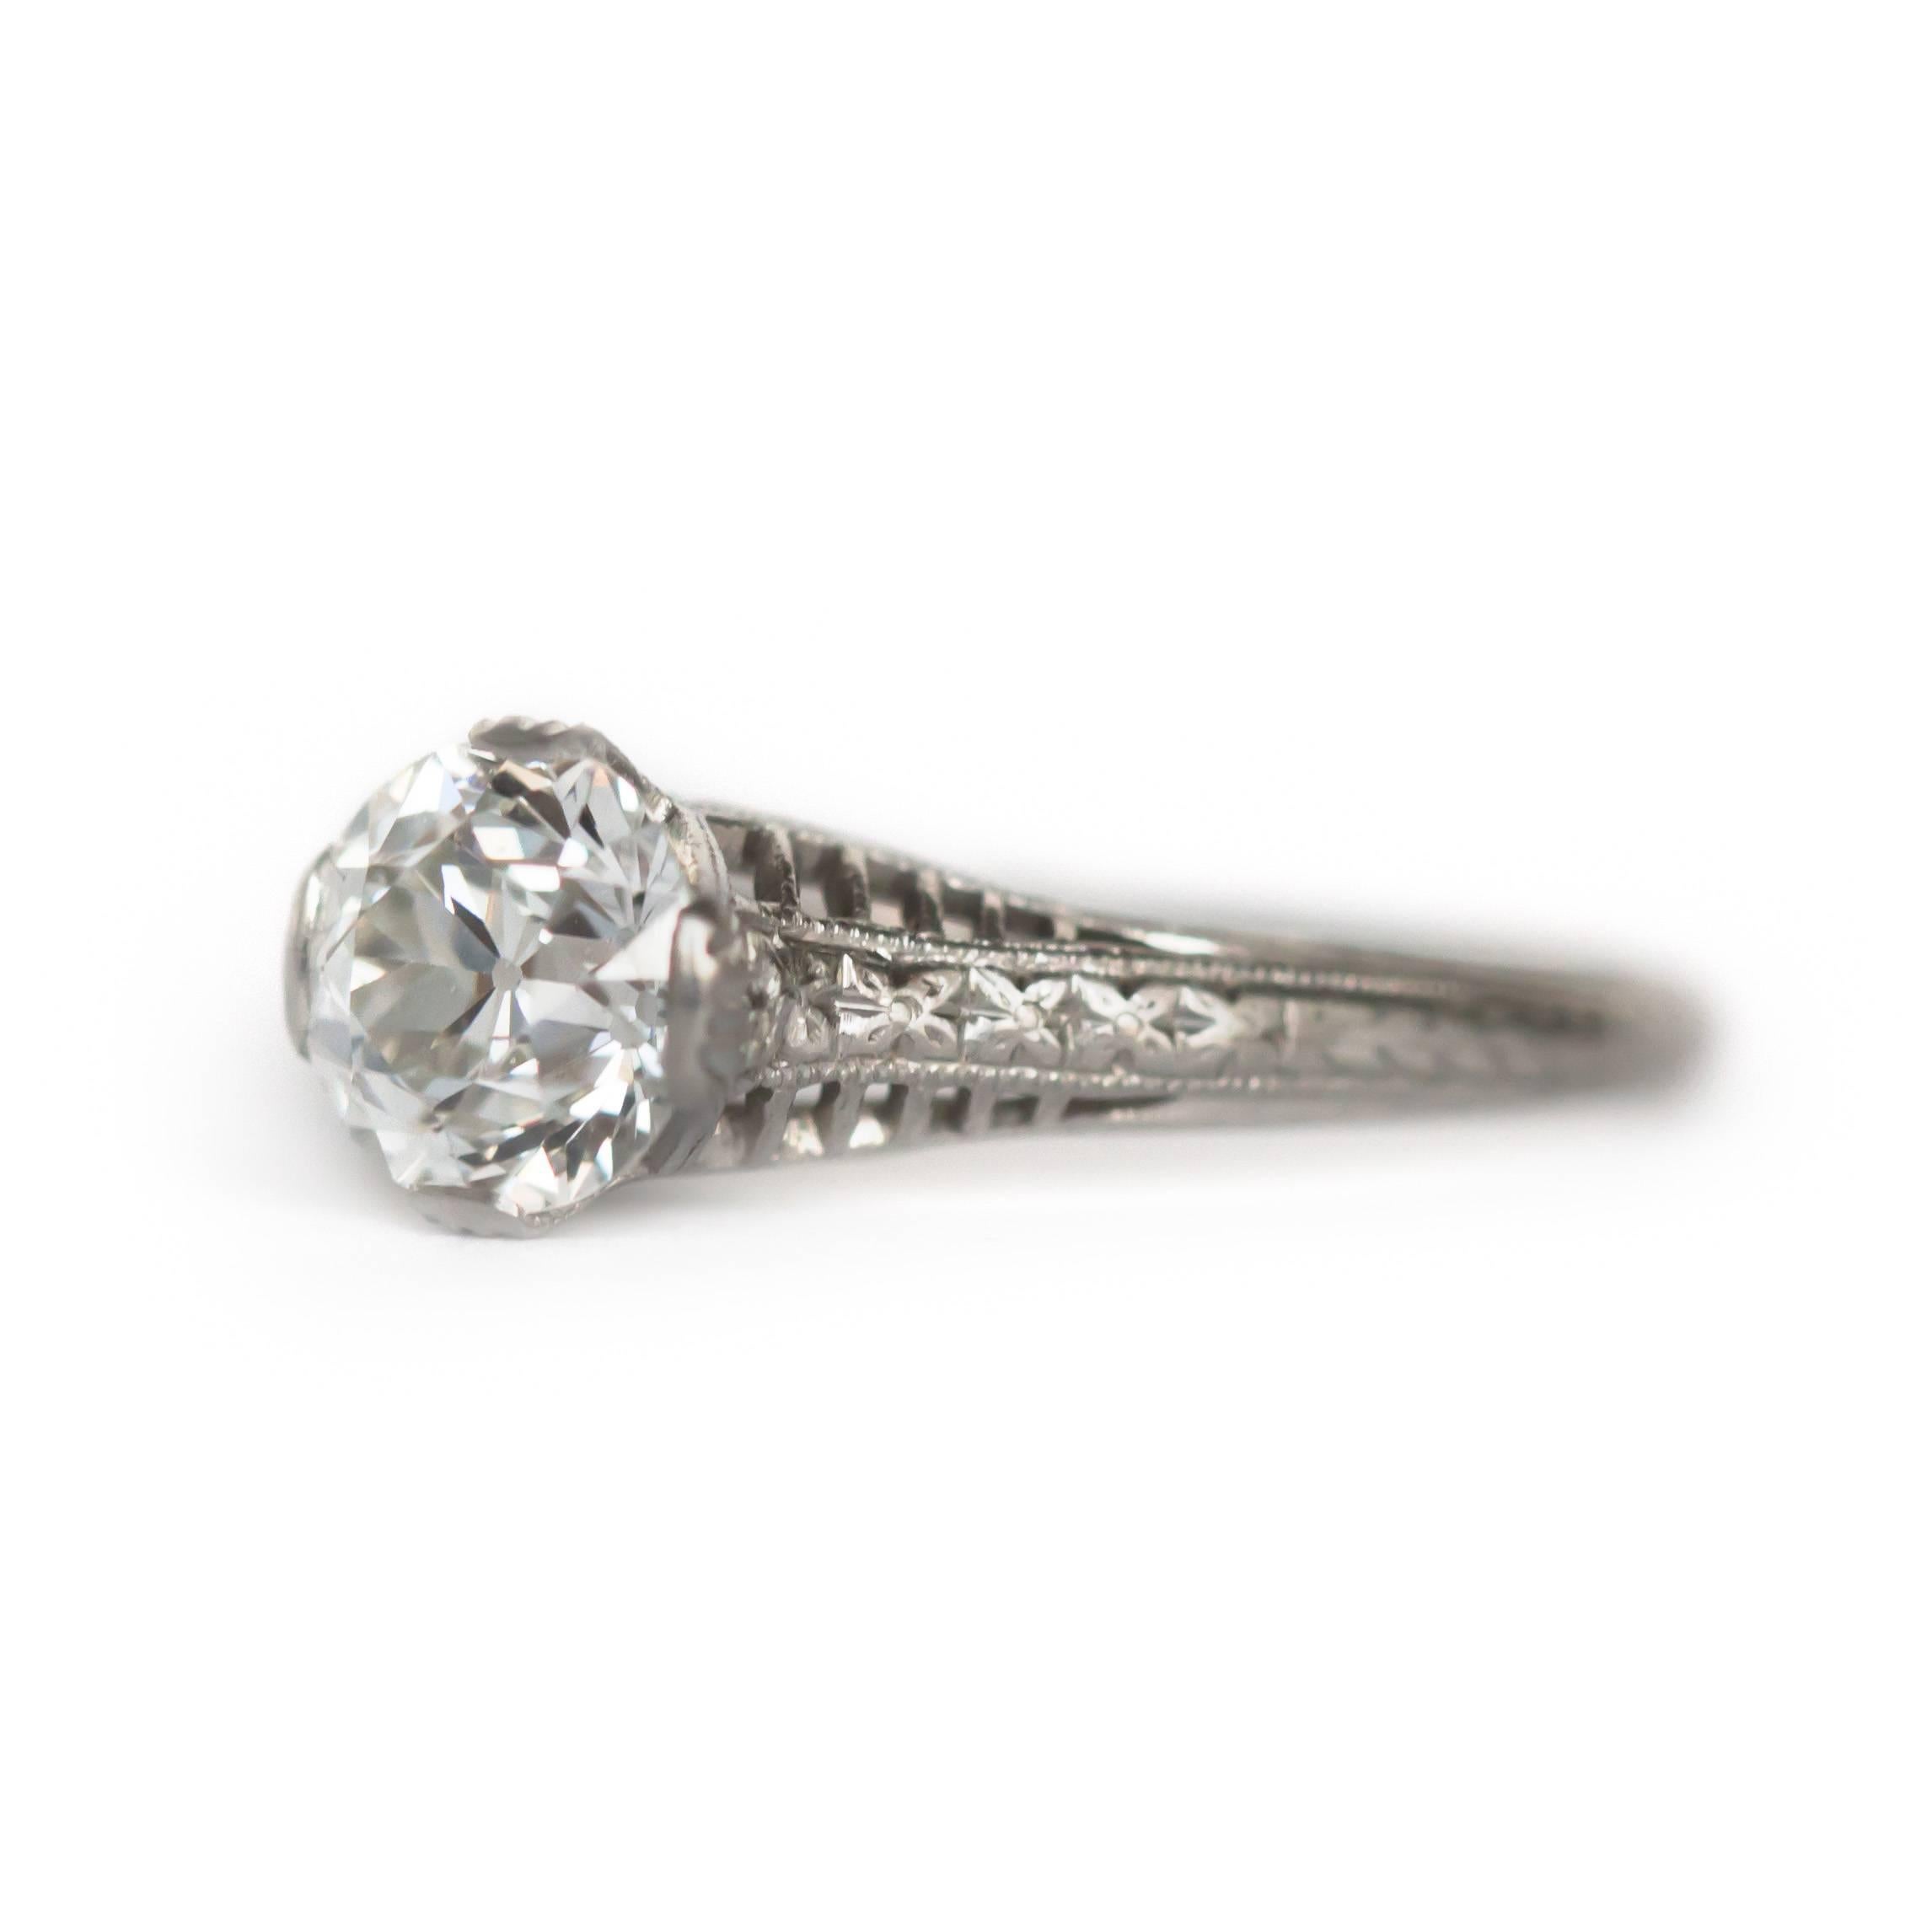 Item Details: 
Ring Size: Approximately 6.30
Metal Type: Platinum
Weight: 3.0 grams

Center Diamond Details:
GIA CERTIFIED Center Diamond - Certificate # [5181846452] 
Shape: Old European Brilliant
Carat Weight: 1.08 carat
Color: G
Clarity: